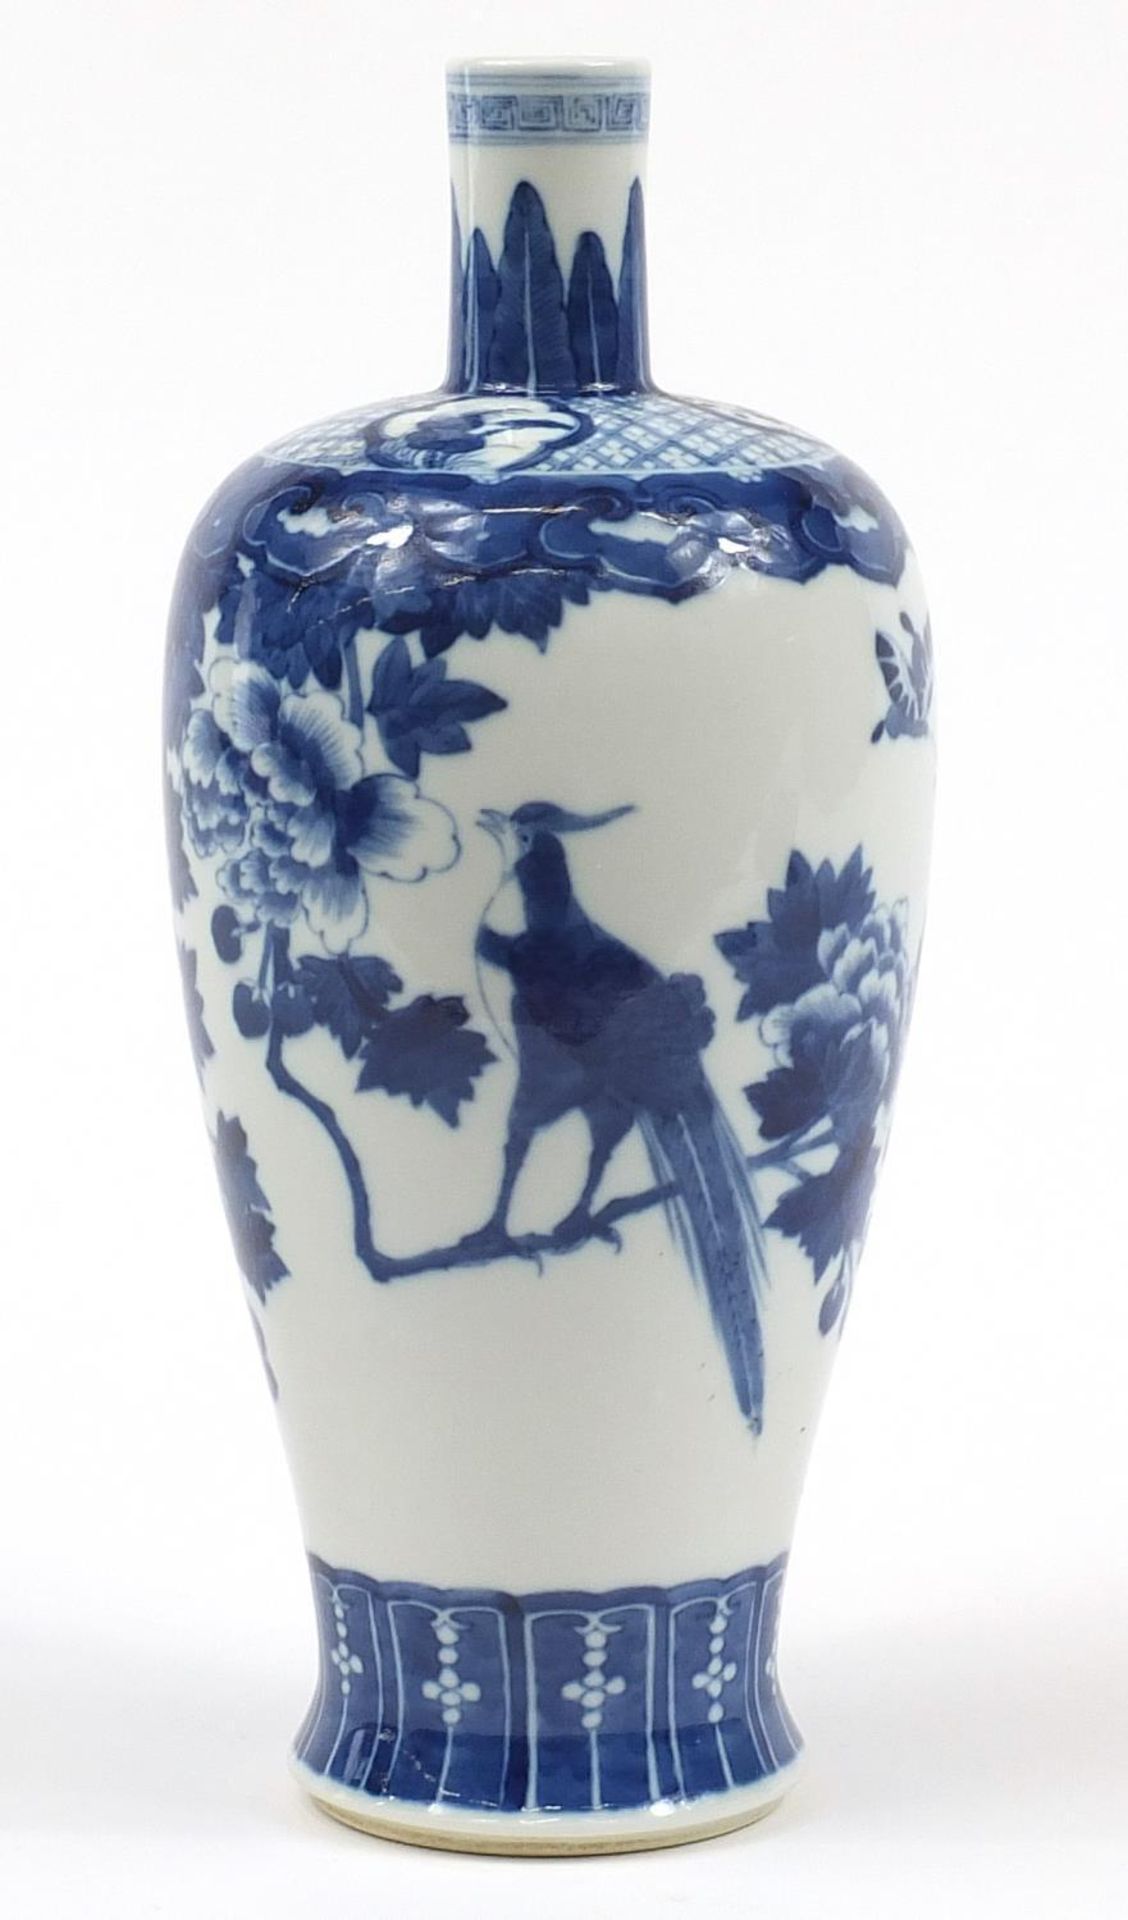 Large Chinese blue and white porcelain vase hand painted with butterflies and a bird amongst